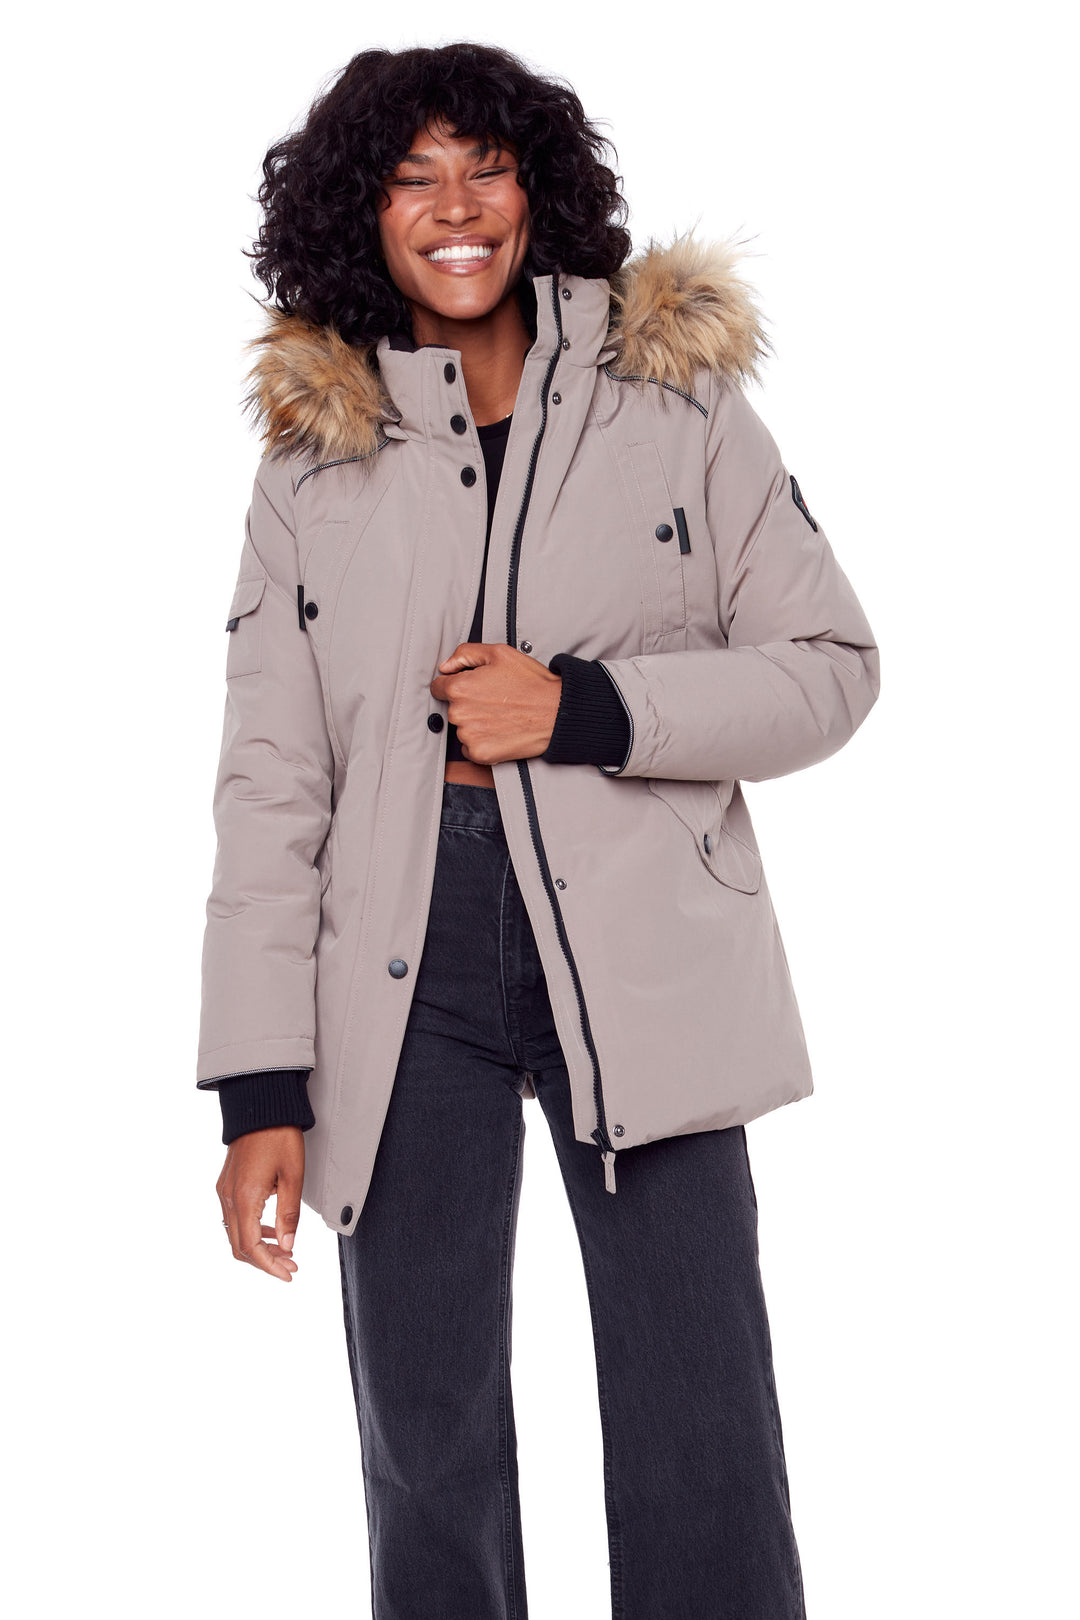 GLACIER | WOMEN'S VEGAN DOWN (RECYCLED) PARKA, TAUPE